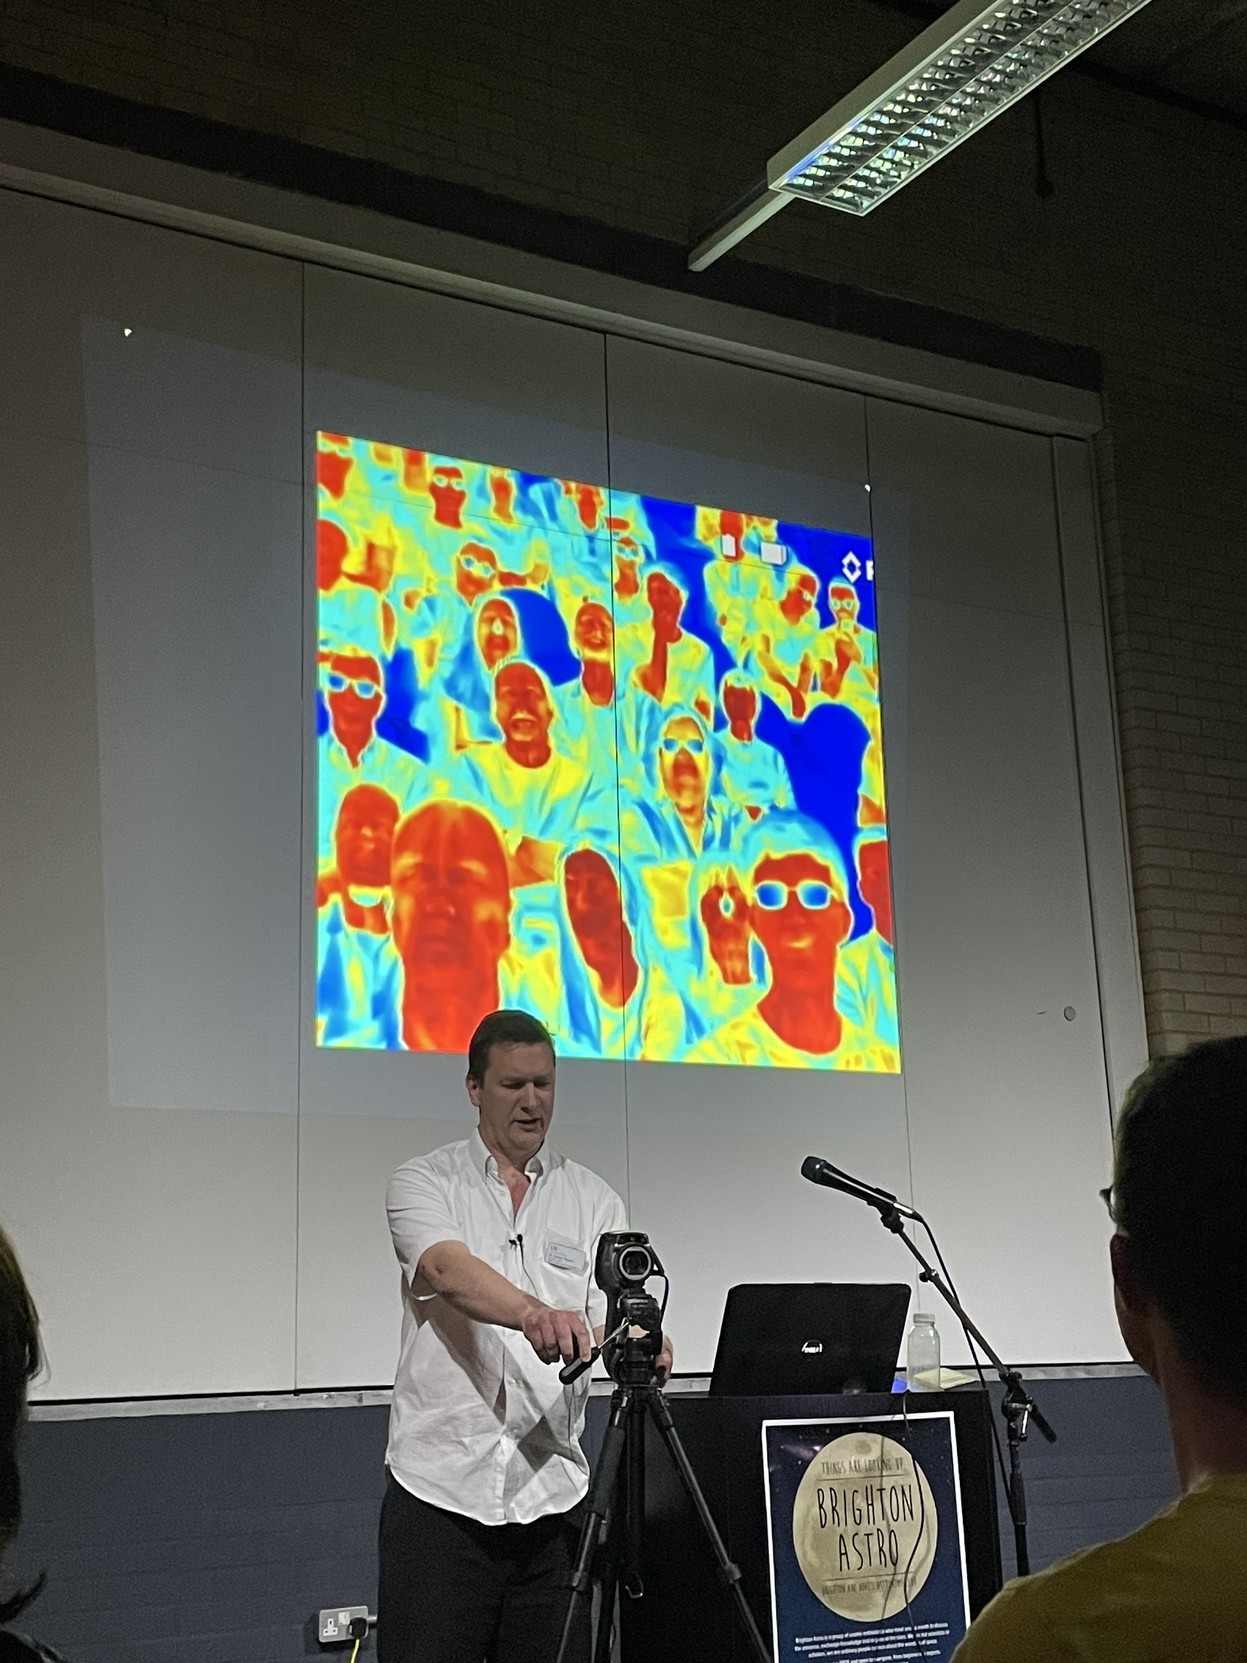 the speaker behind an infrared camera, pointed at the audience, with the image projected showing faces in red and bodies in greens and blues. glasses appear dark.